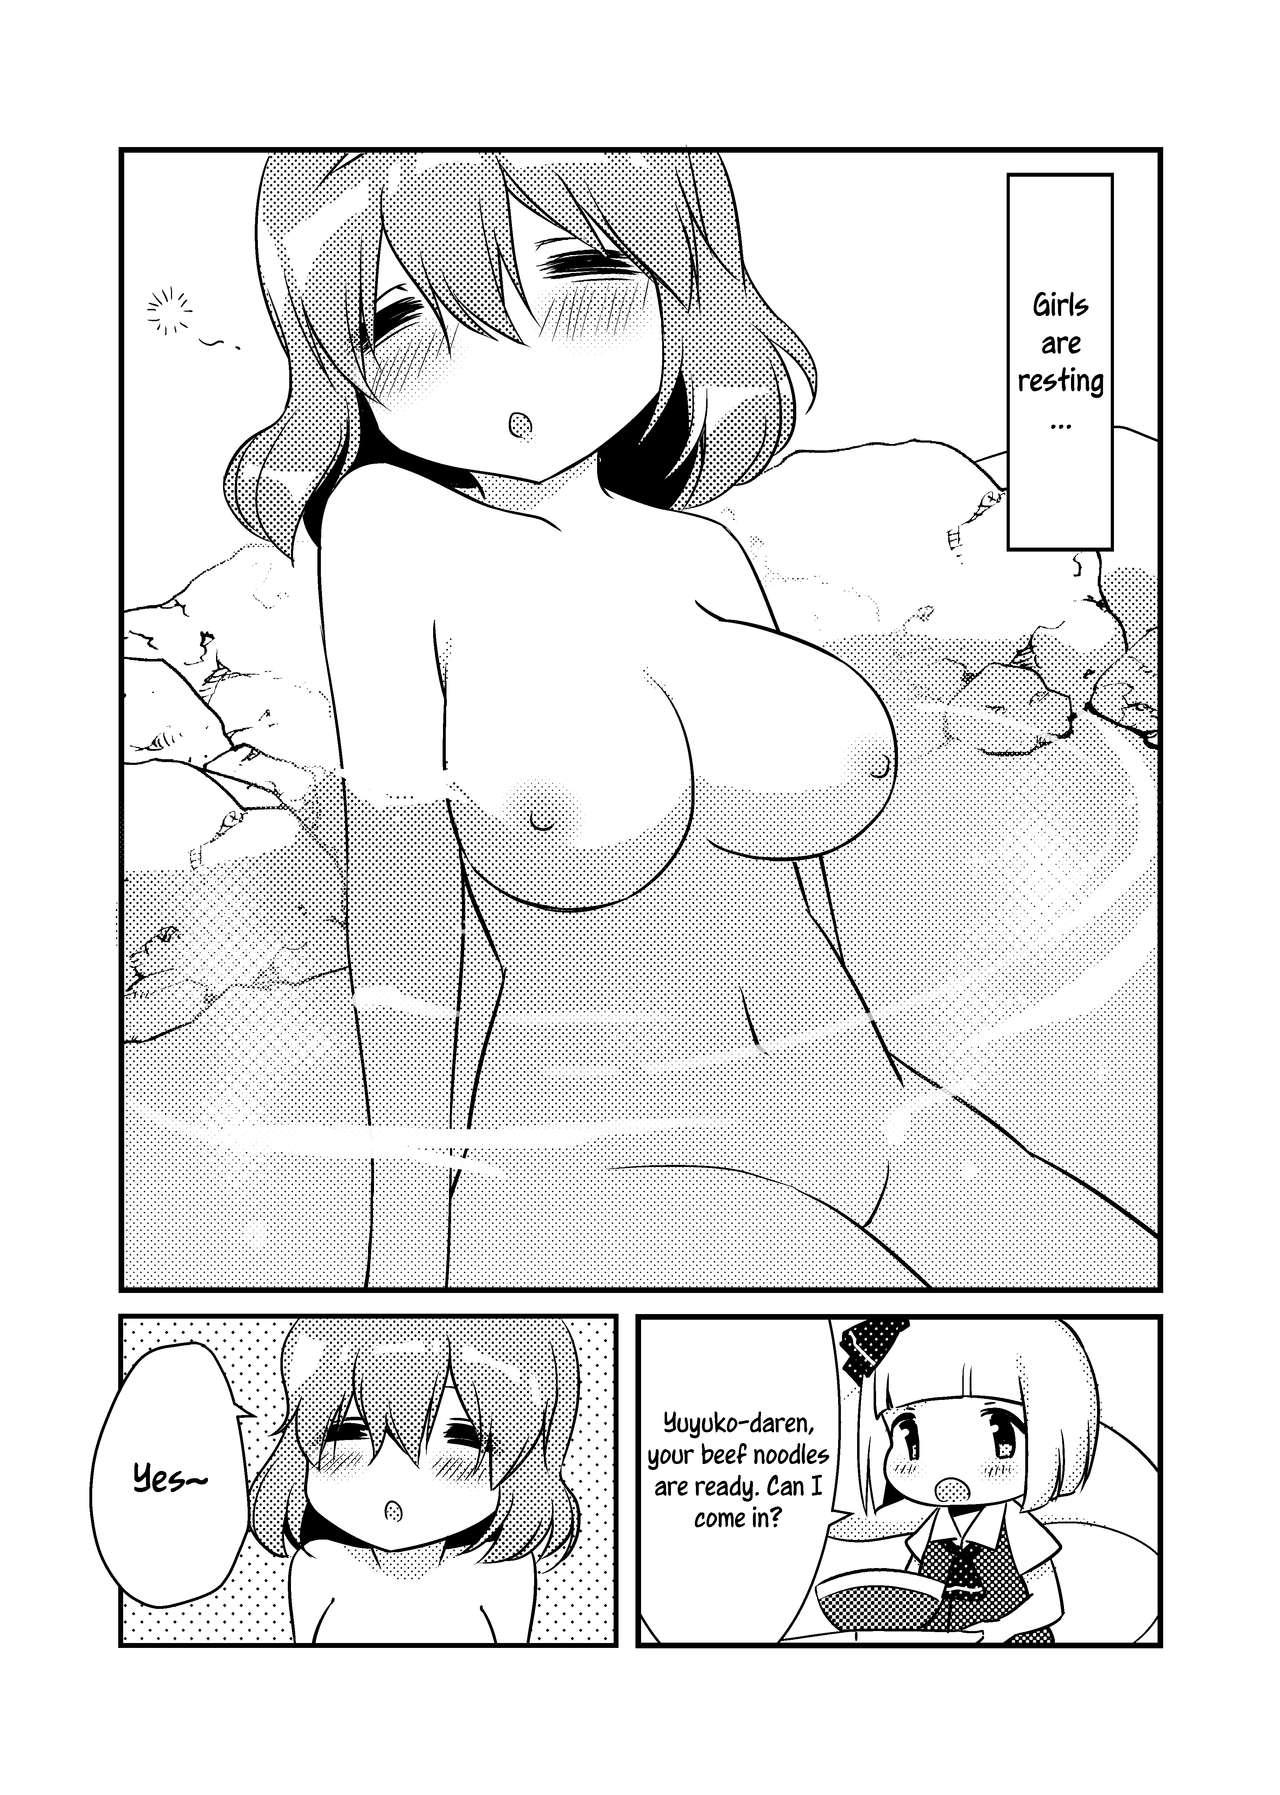 Babe ????一起泡温泉吧！ | ????Let's Soak in the Hot Spring! - Touhou project Sex - Page 3